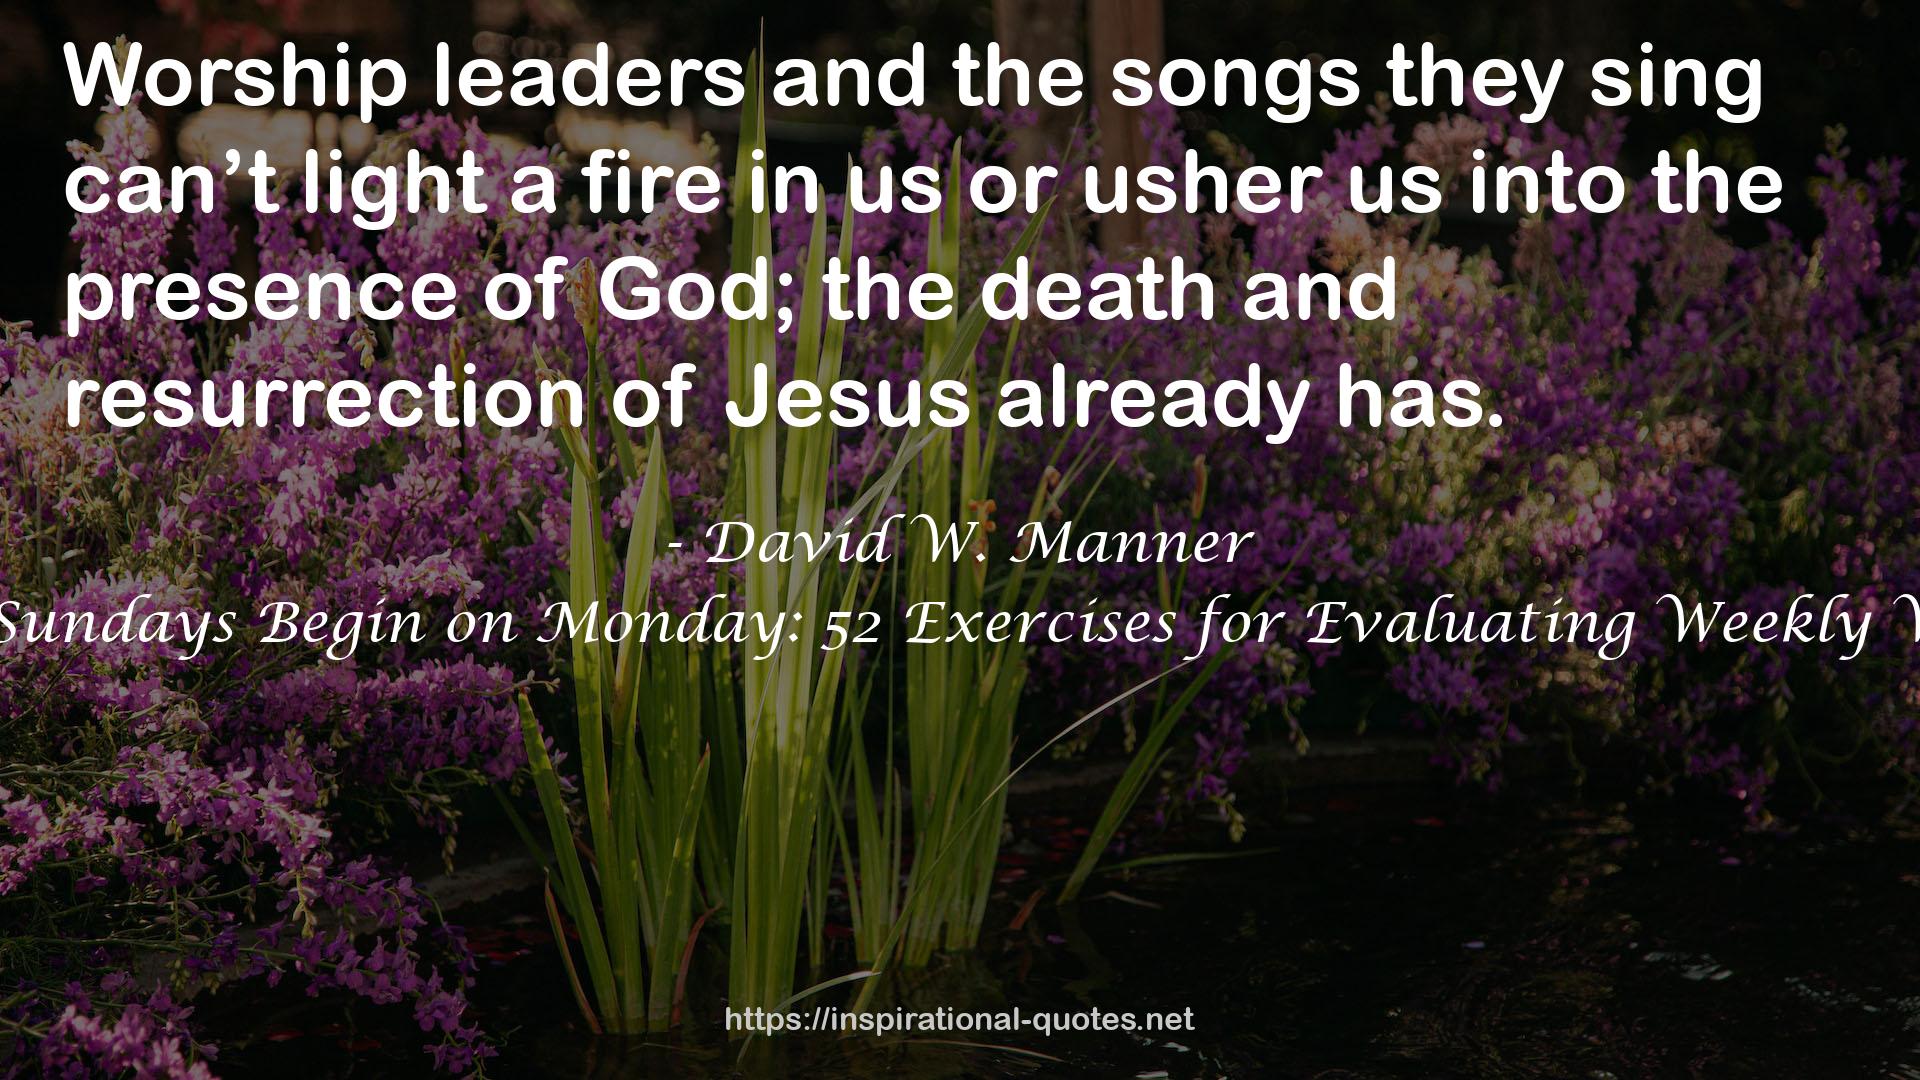 Better Sundays Begin on Monday: 52 Exercises for Evaluating Weekly Worship QUOTES